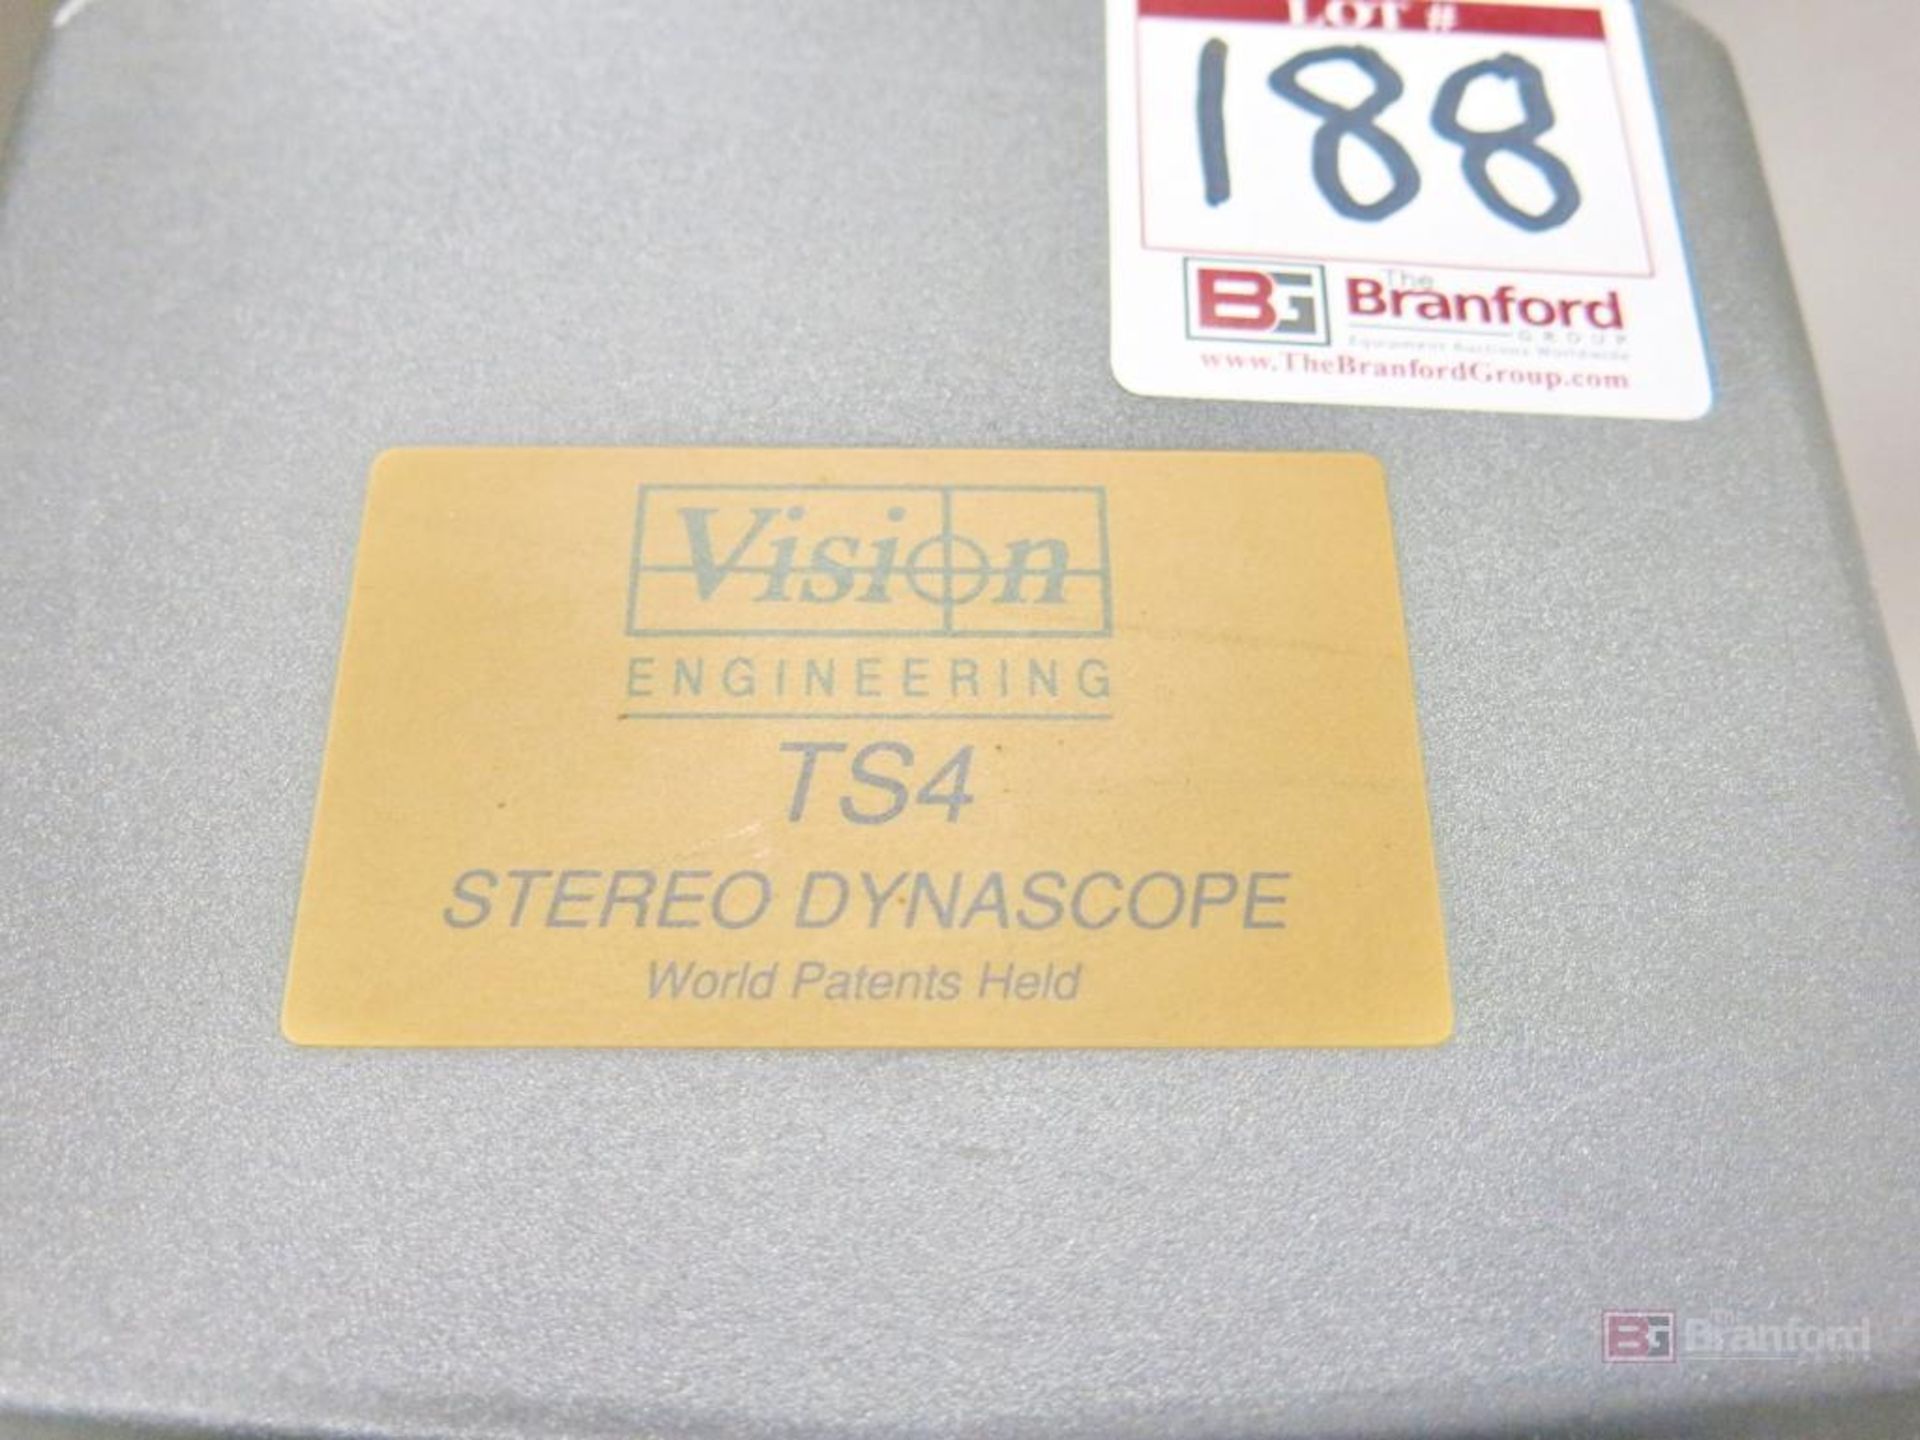 Vision Engineering Model TS4 Stereozoom Dynascope - Image 3 of 5